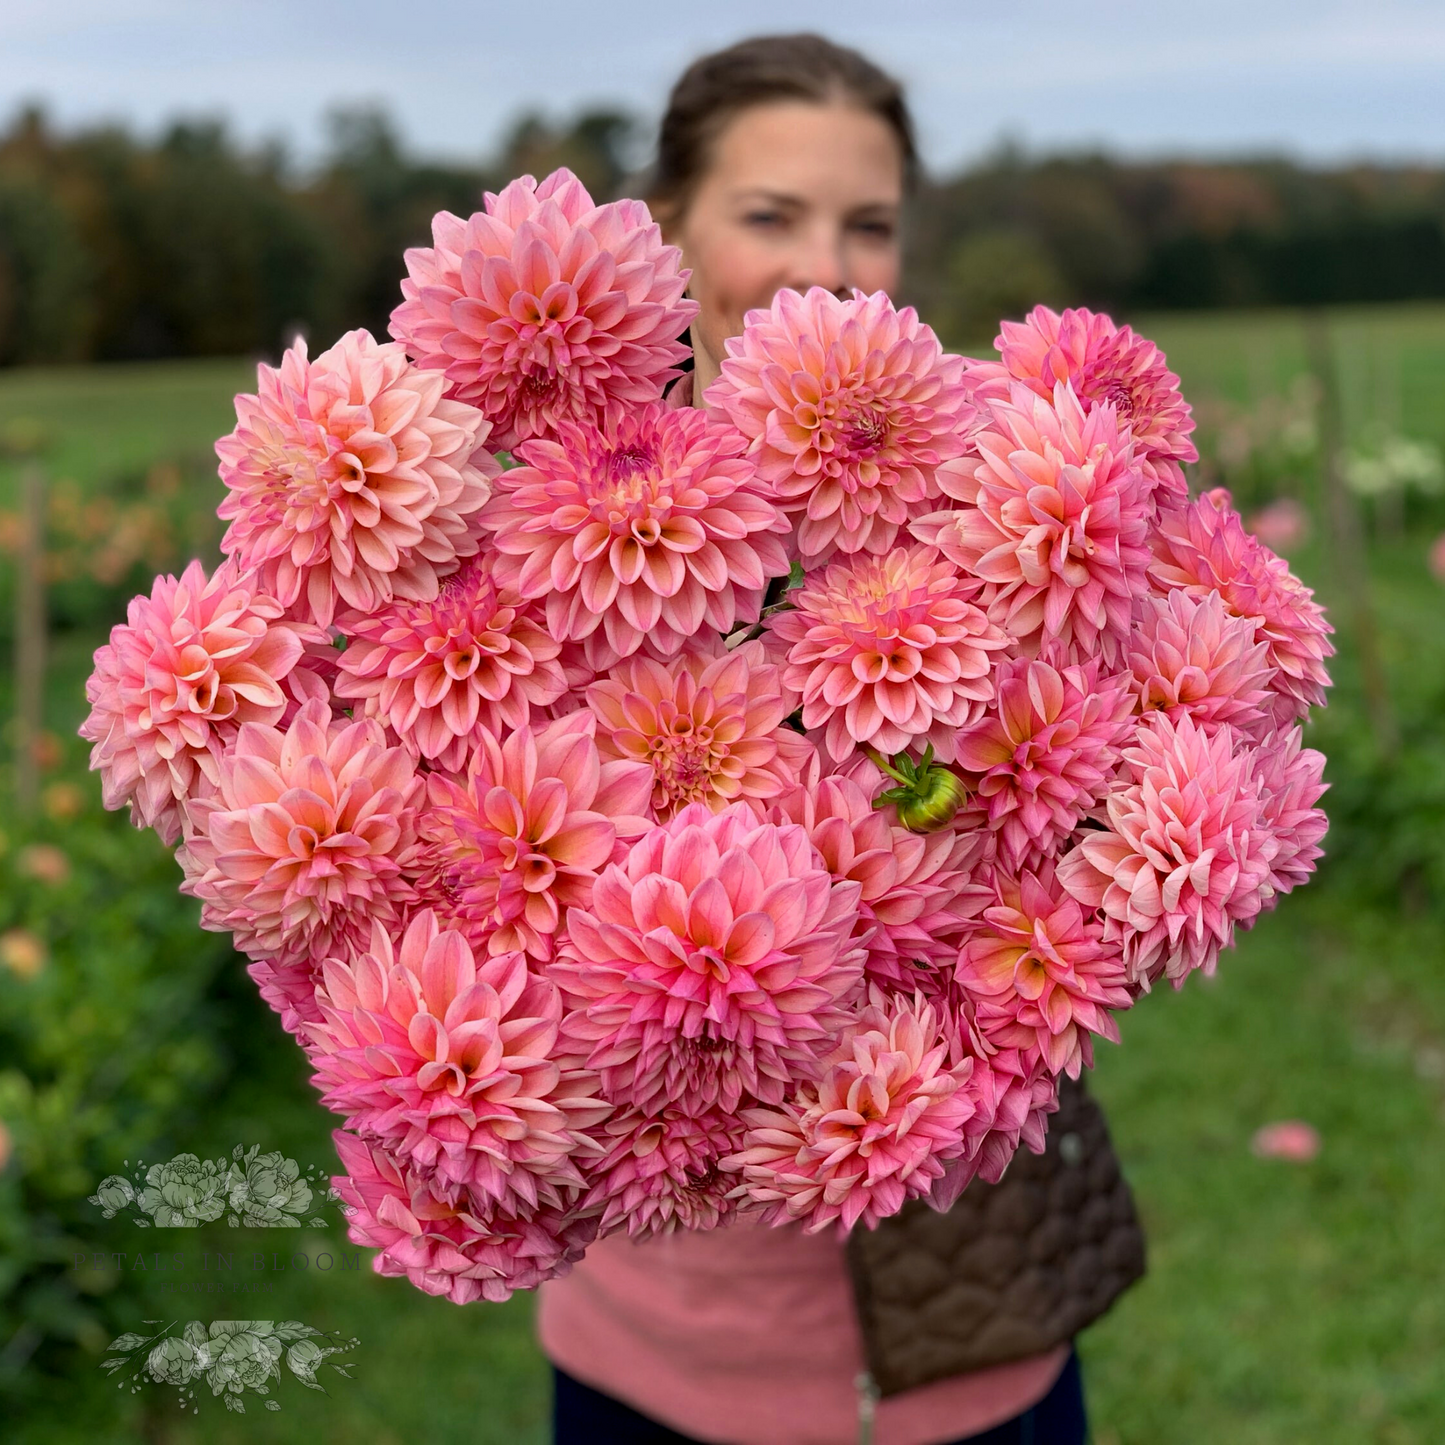 
                  
                    Coralie Dahlias are a sunrise in a bloom! Vibrant shades of pinks & light yellows are a sight to behold in any garden, bouquet or centerpiece. Come see our Coralie Dahlias on U-Pick Saturdays in September at Petals in Bloom Flower Farm Williamstown,NY
                  
                